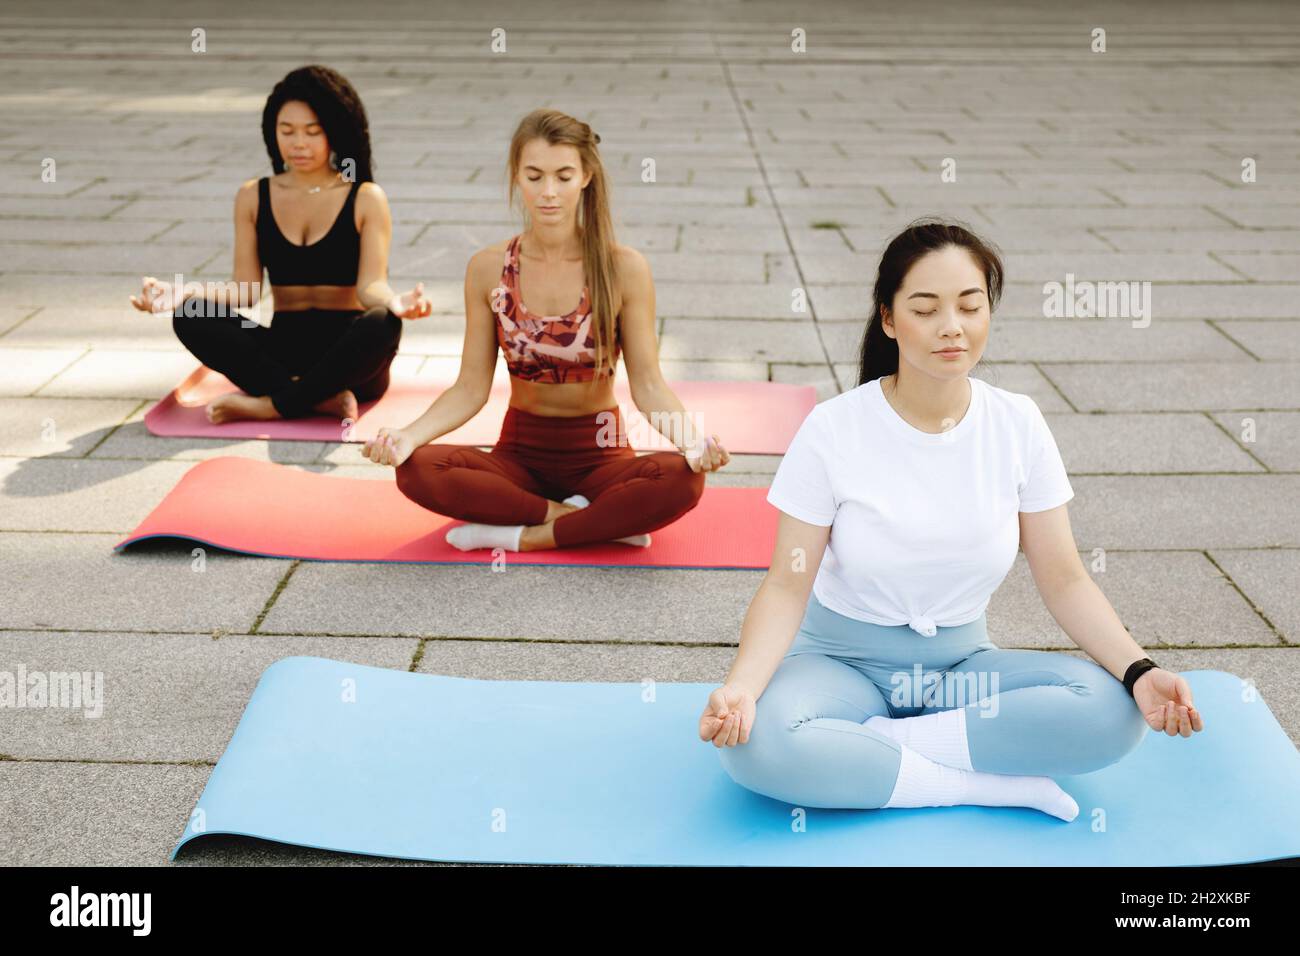 Three beautiful young women doing yoga together. Stock Photo